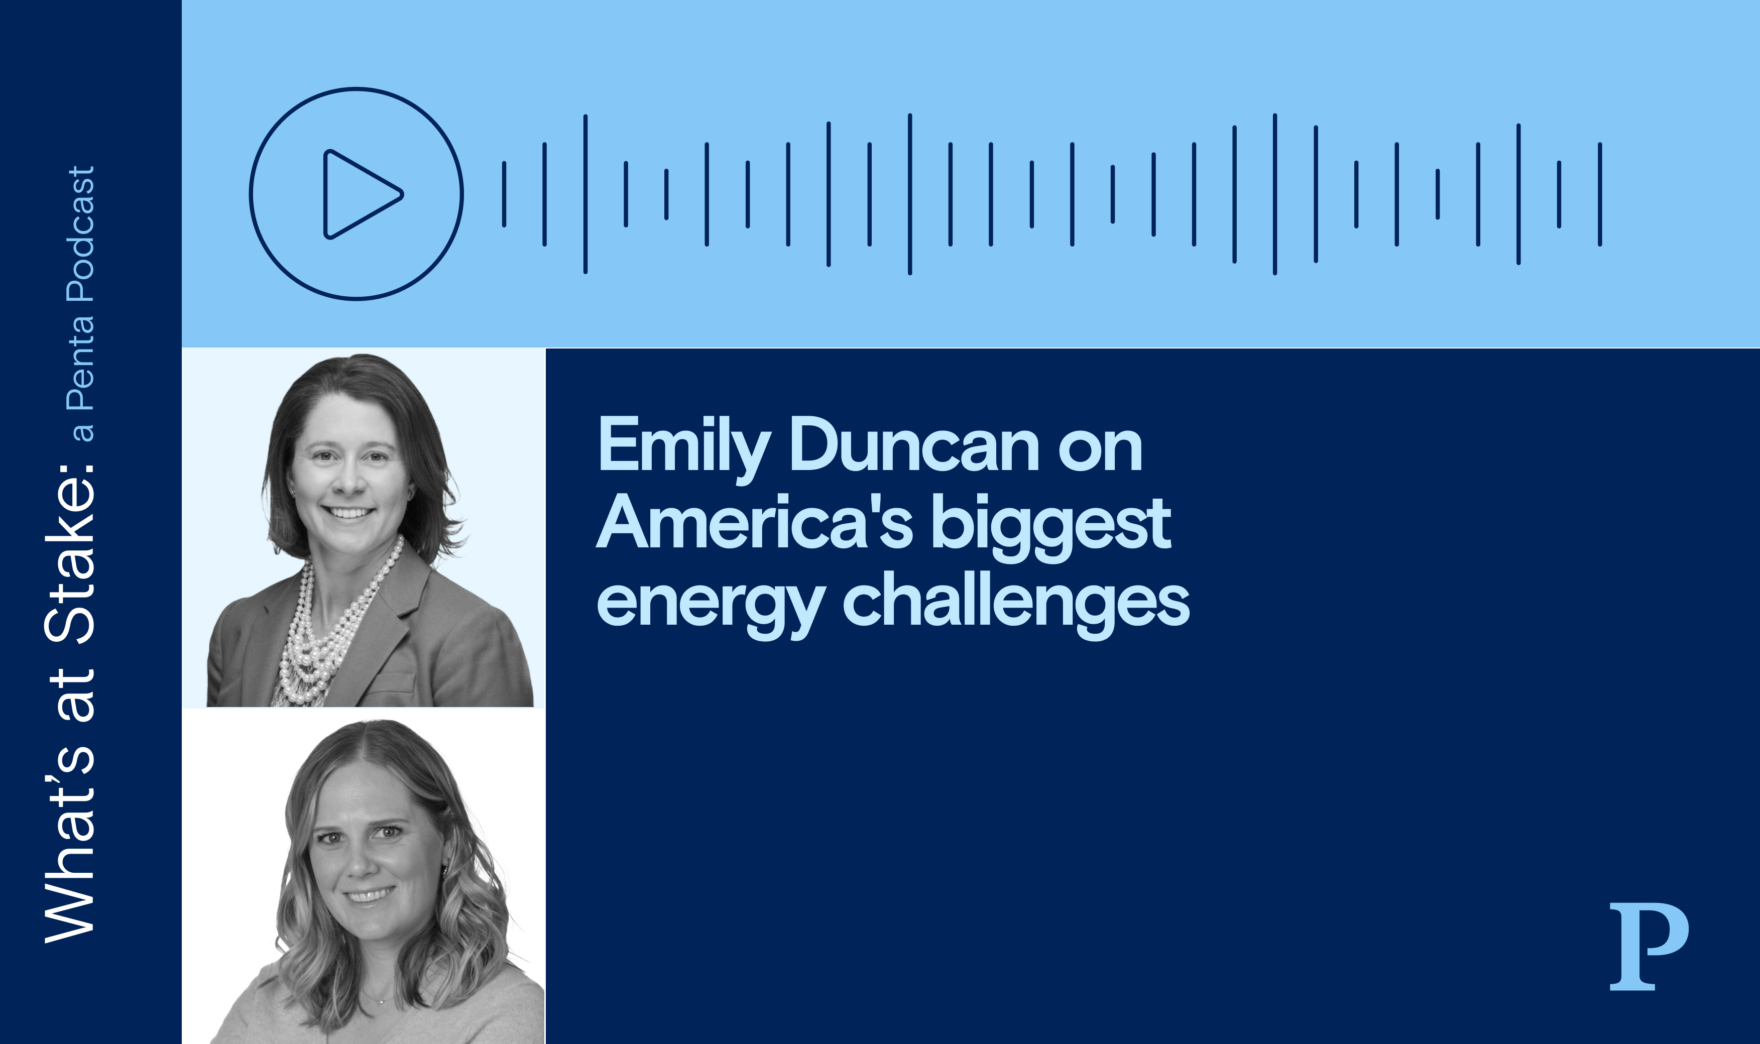 Emily Duncan on America’s biggest energy challenges